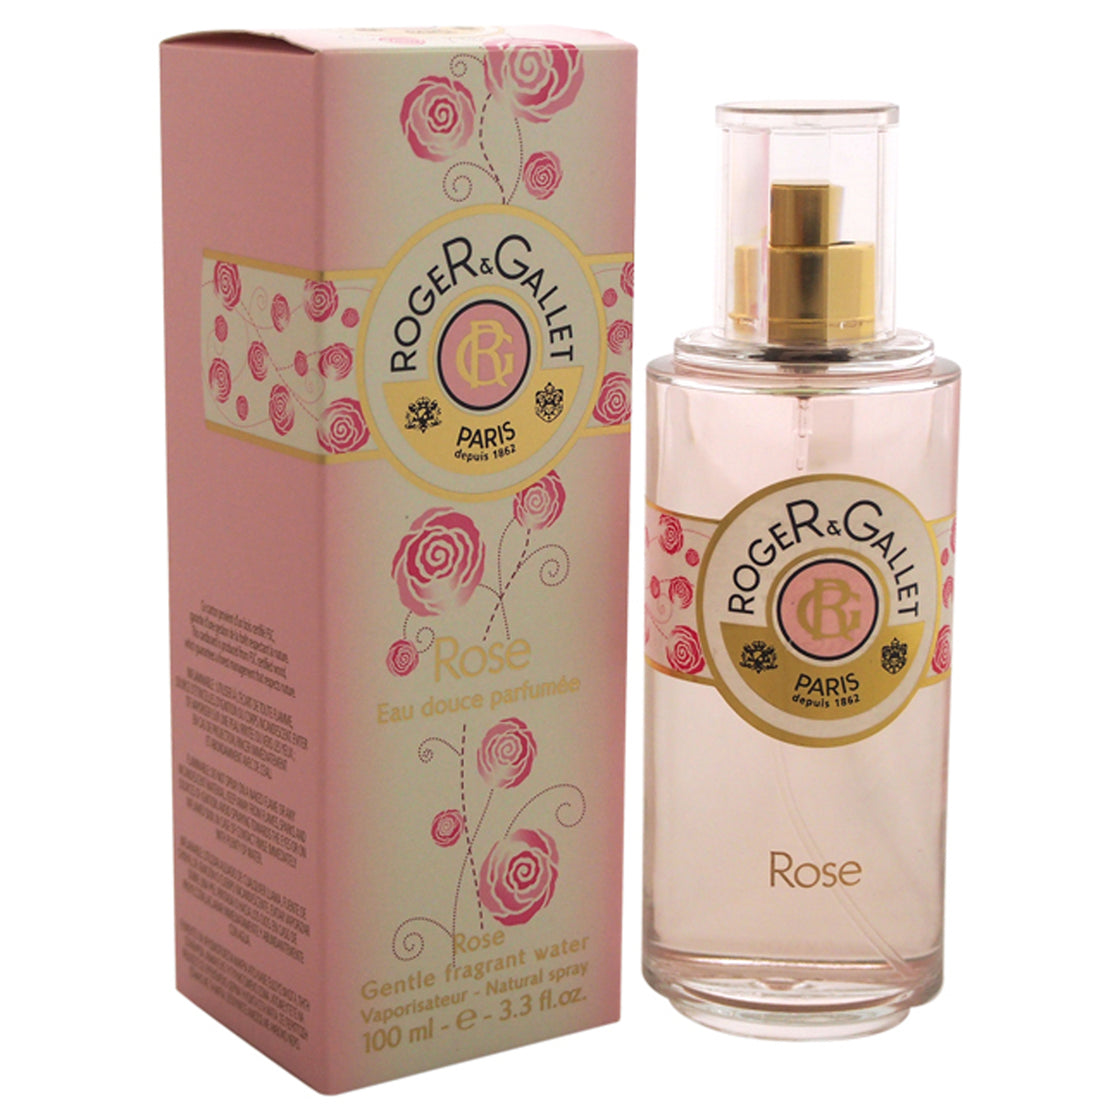 Rose by Roger & Gallet for Unisex - 3.3 oz Fragrant Water Spray